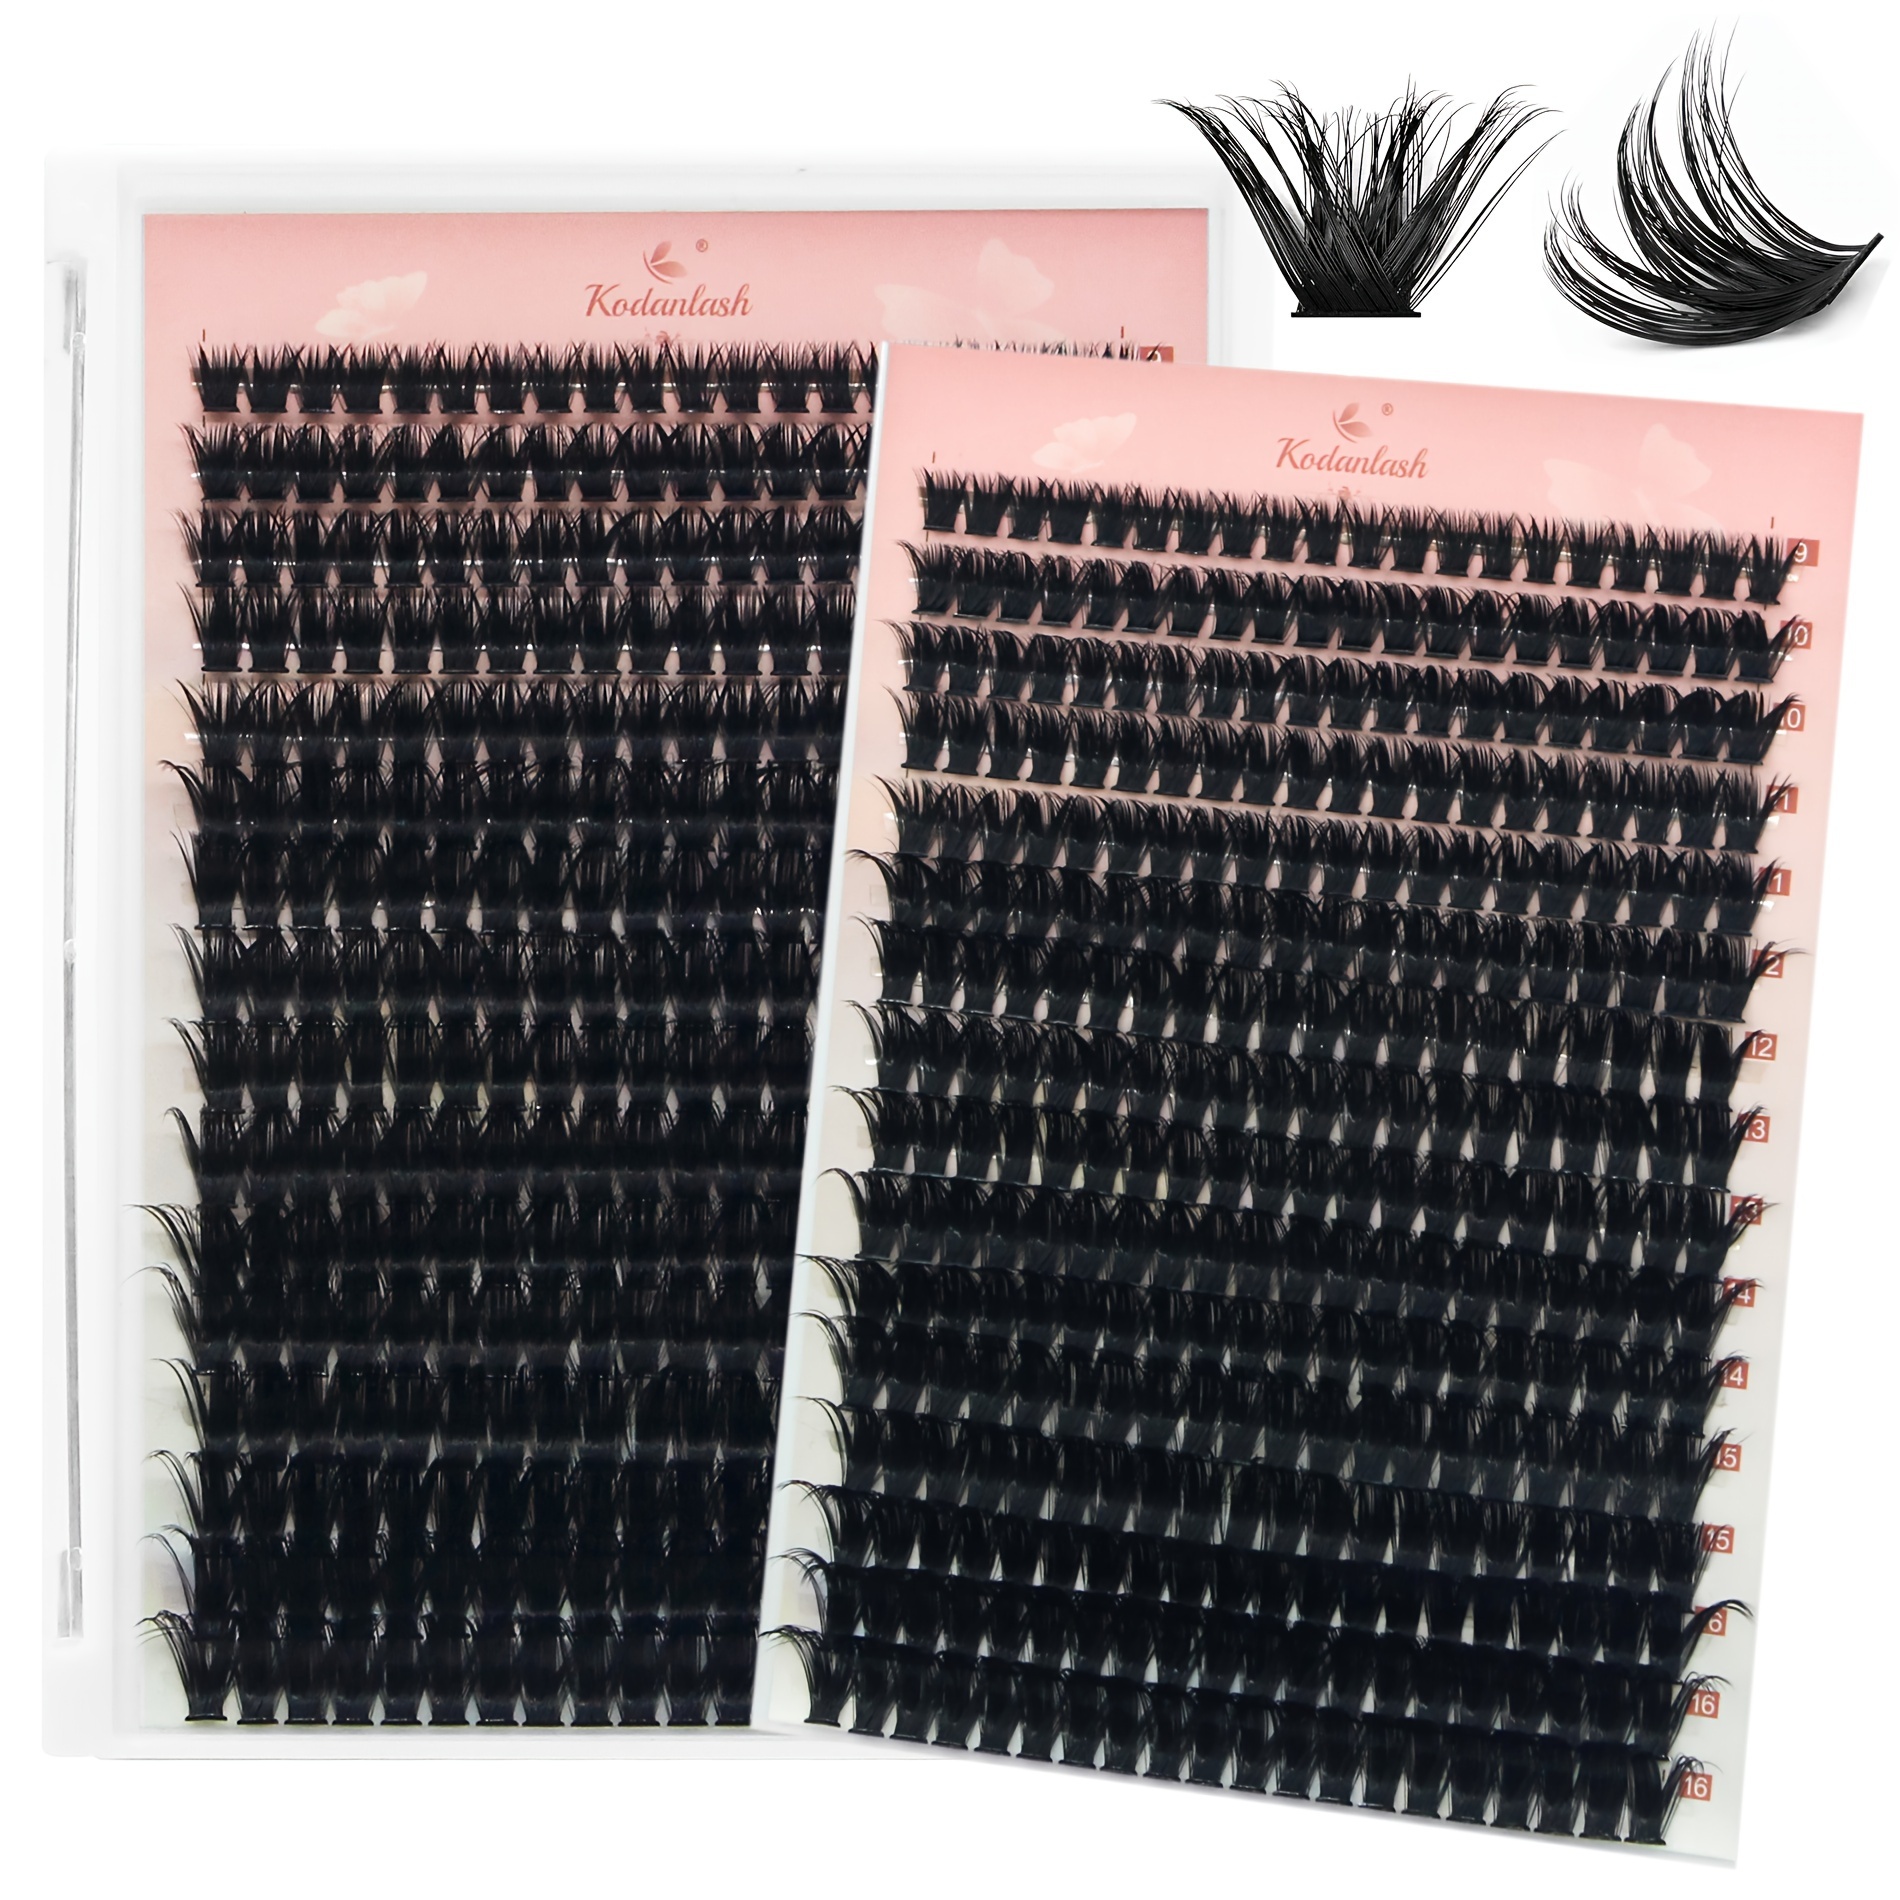 

320pcs Lash Clusters Extra Thick 100d Fluffy Eyelash Clusters Faux Mink Eyelashes Diy Eyelash Extension At Home Wispy Manga Lashes Look 0.07d Curling 9-16mm Mix